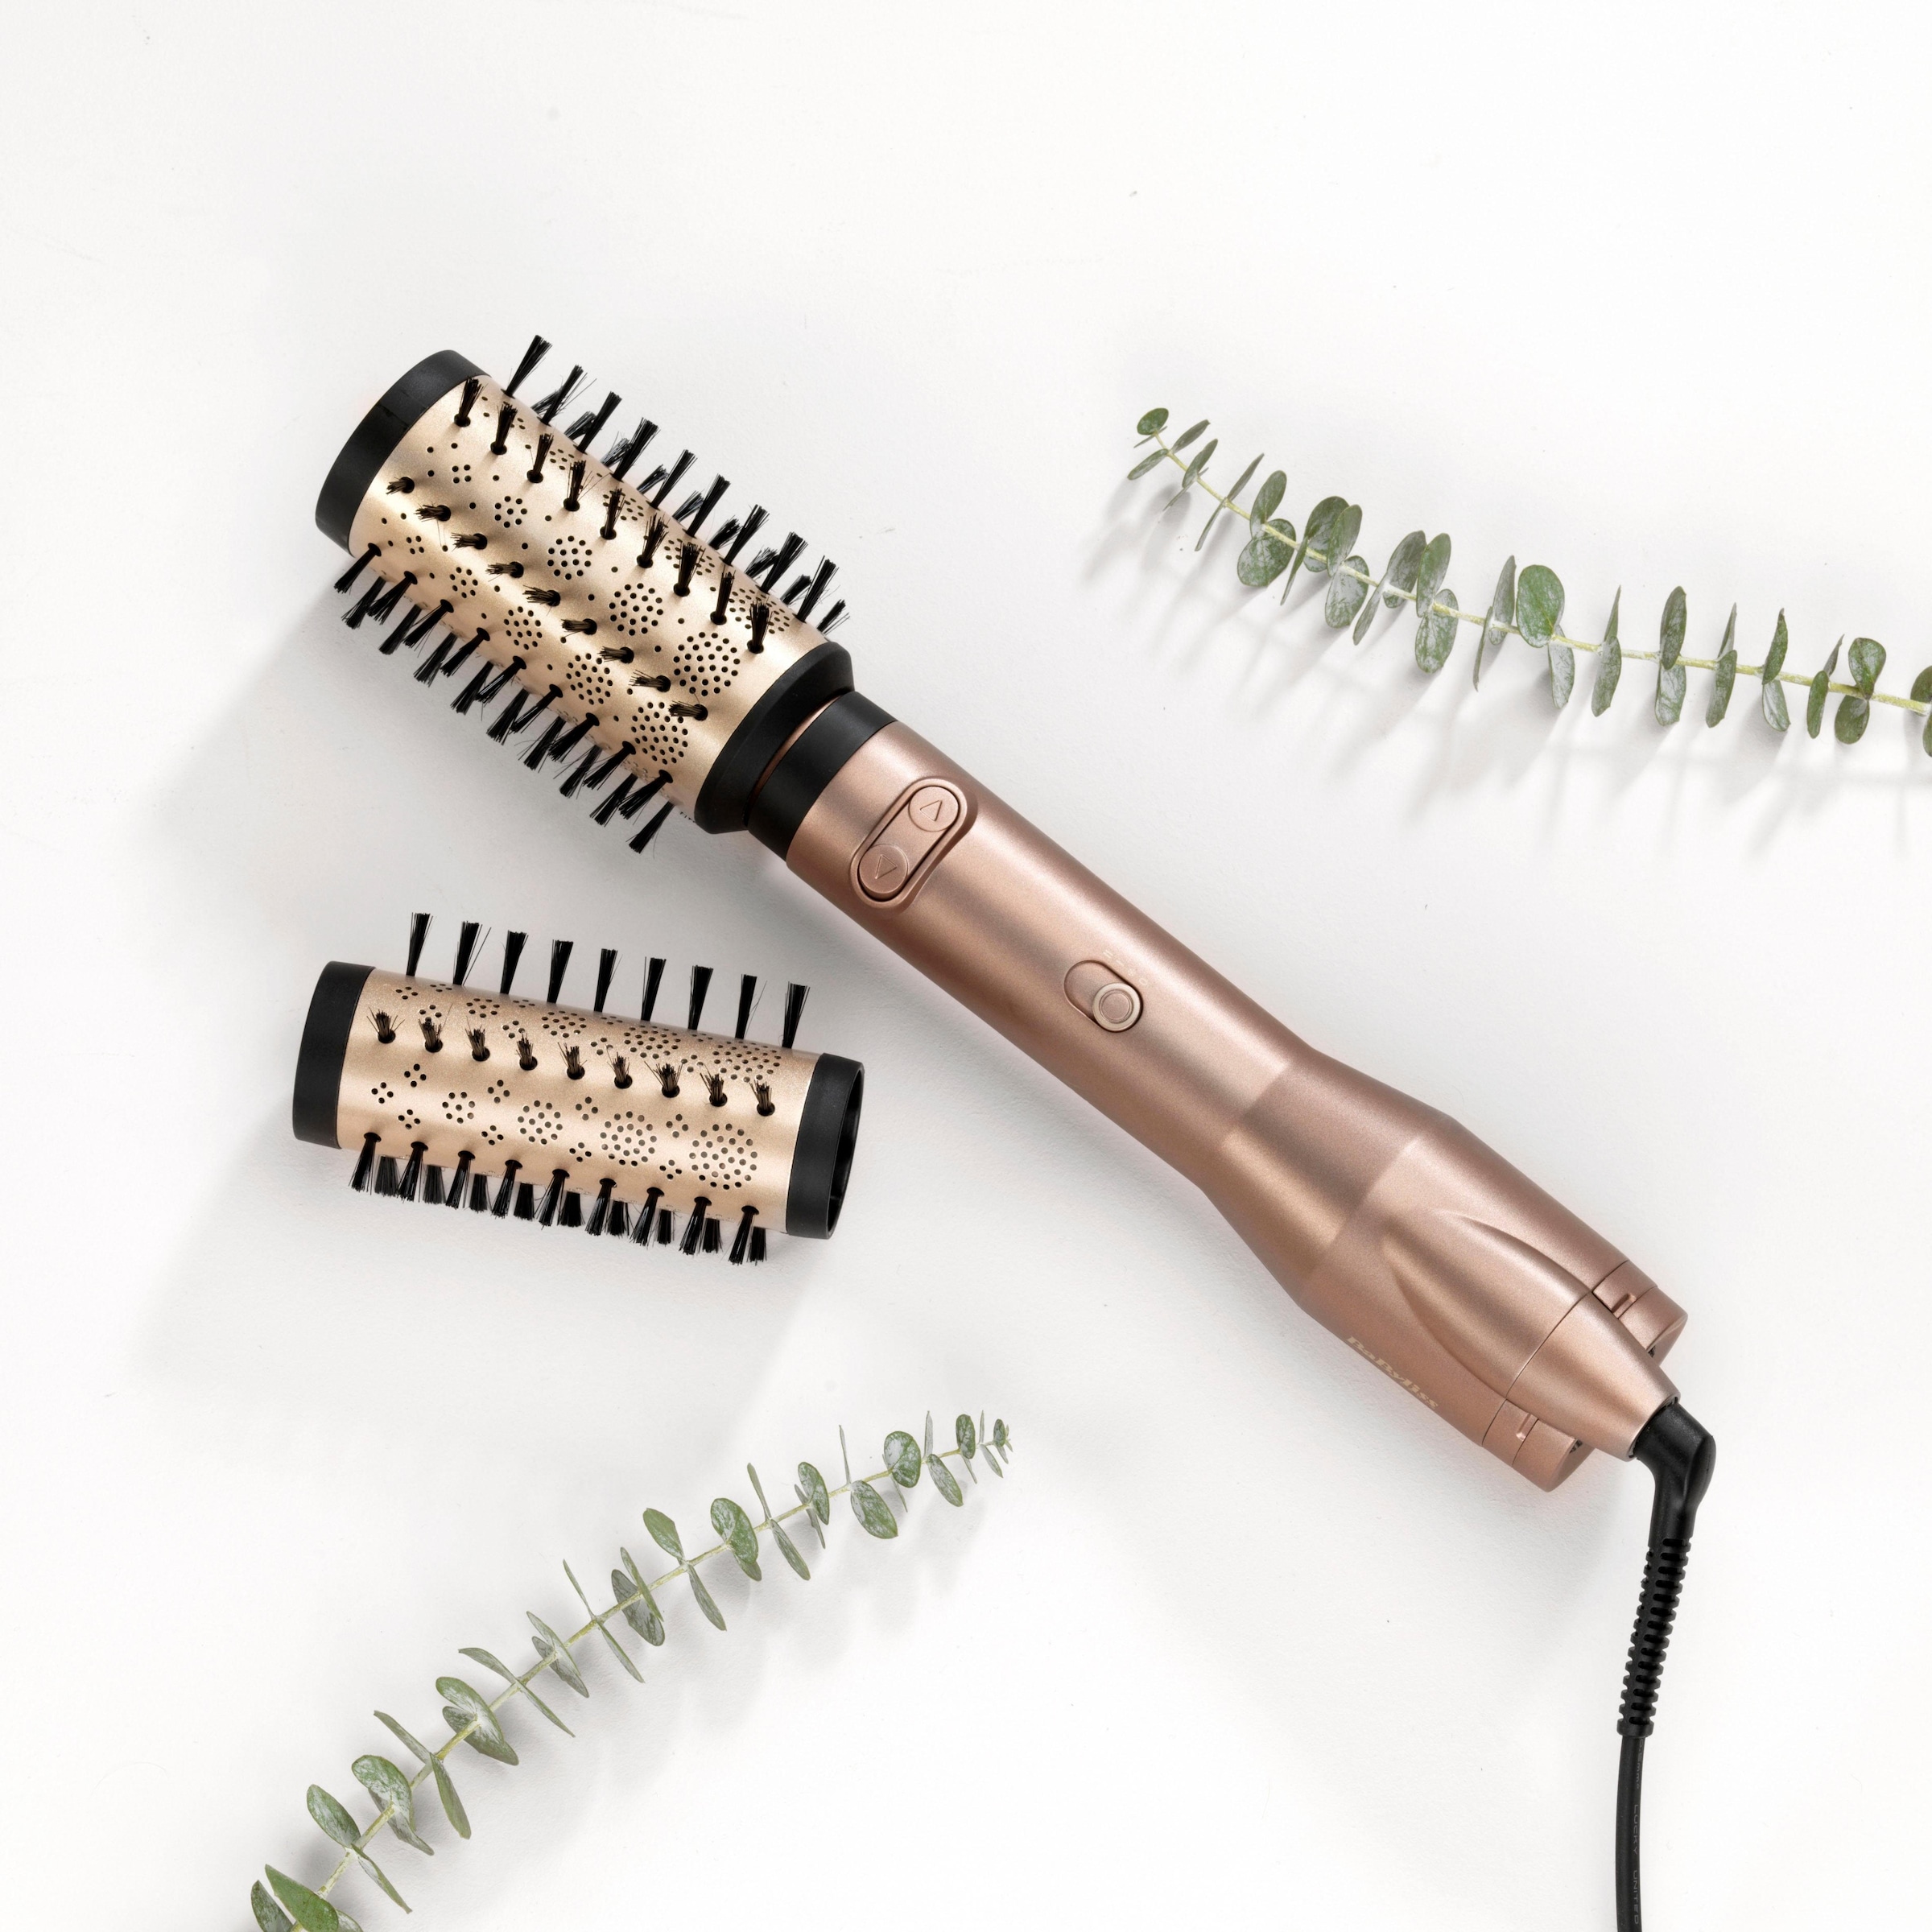 »AS952E 2 OTTO Hair bei Dual«, BaByliss mit Warmluftbürste Big Aufsätze}, 2 Aufsätzen Warmluftbürste rotierende